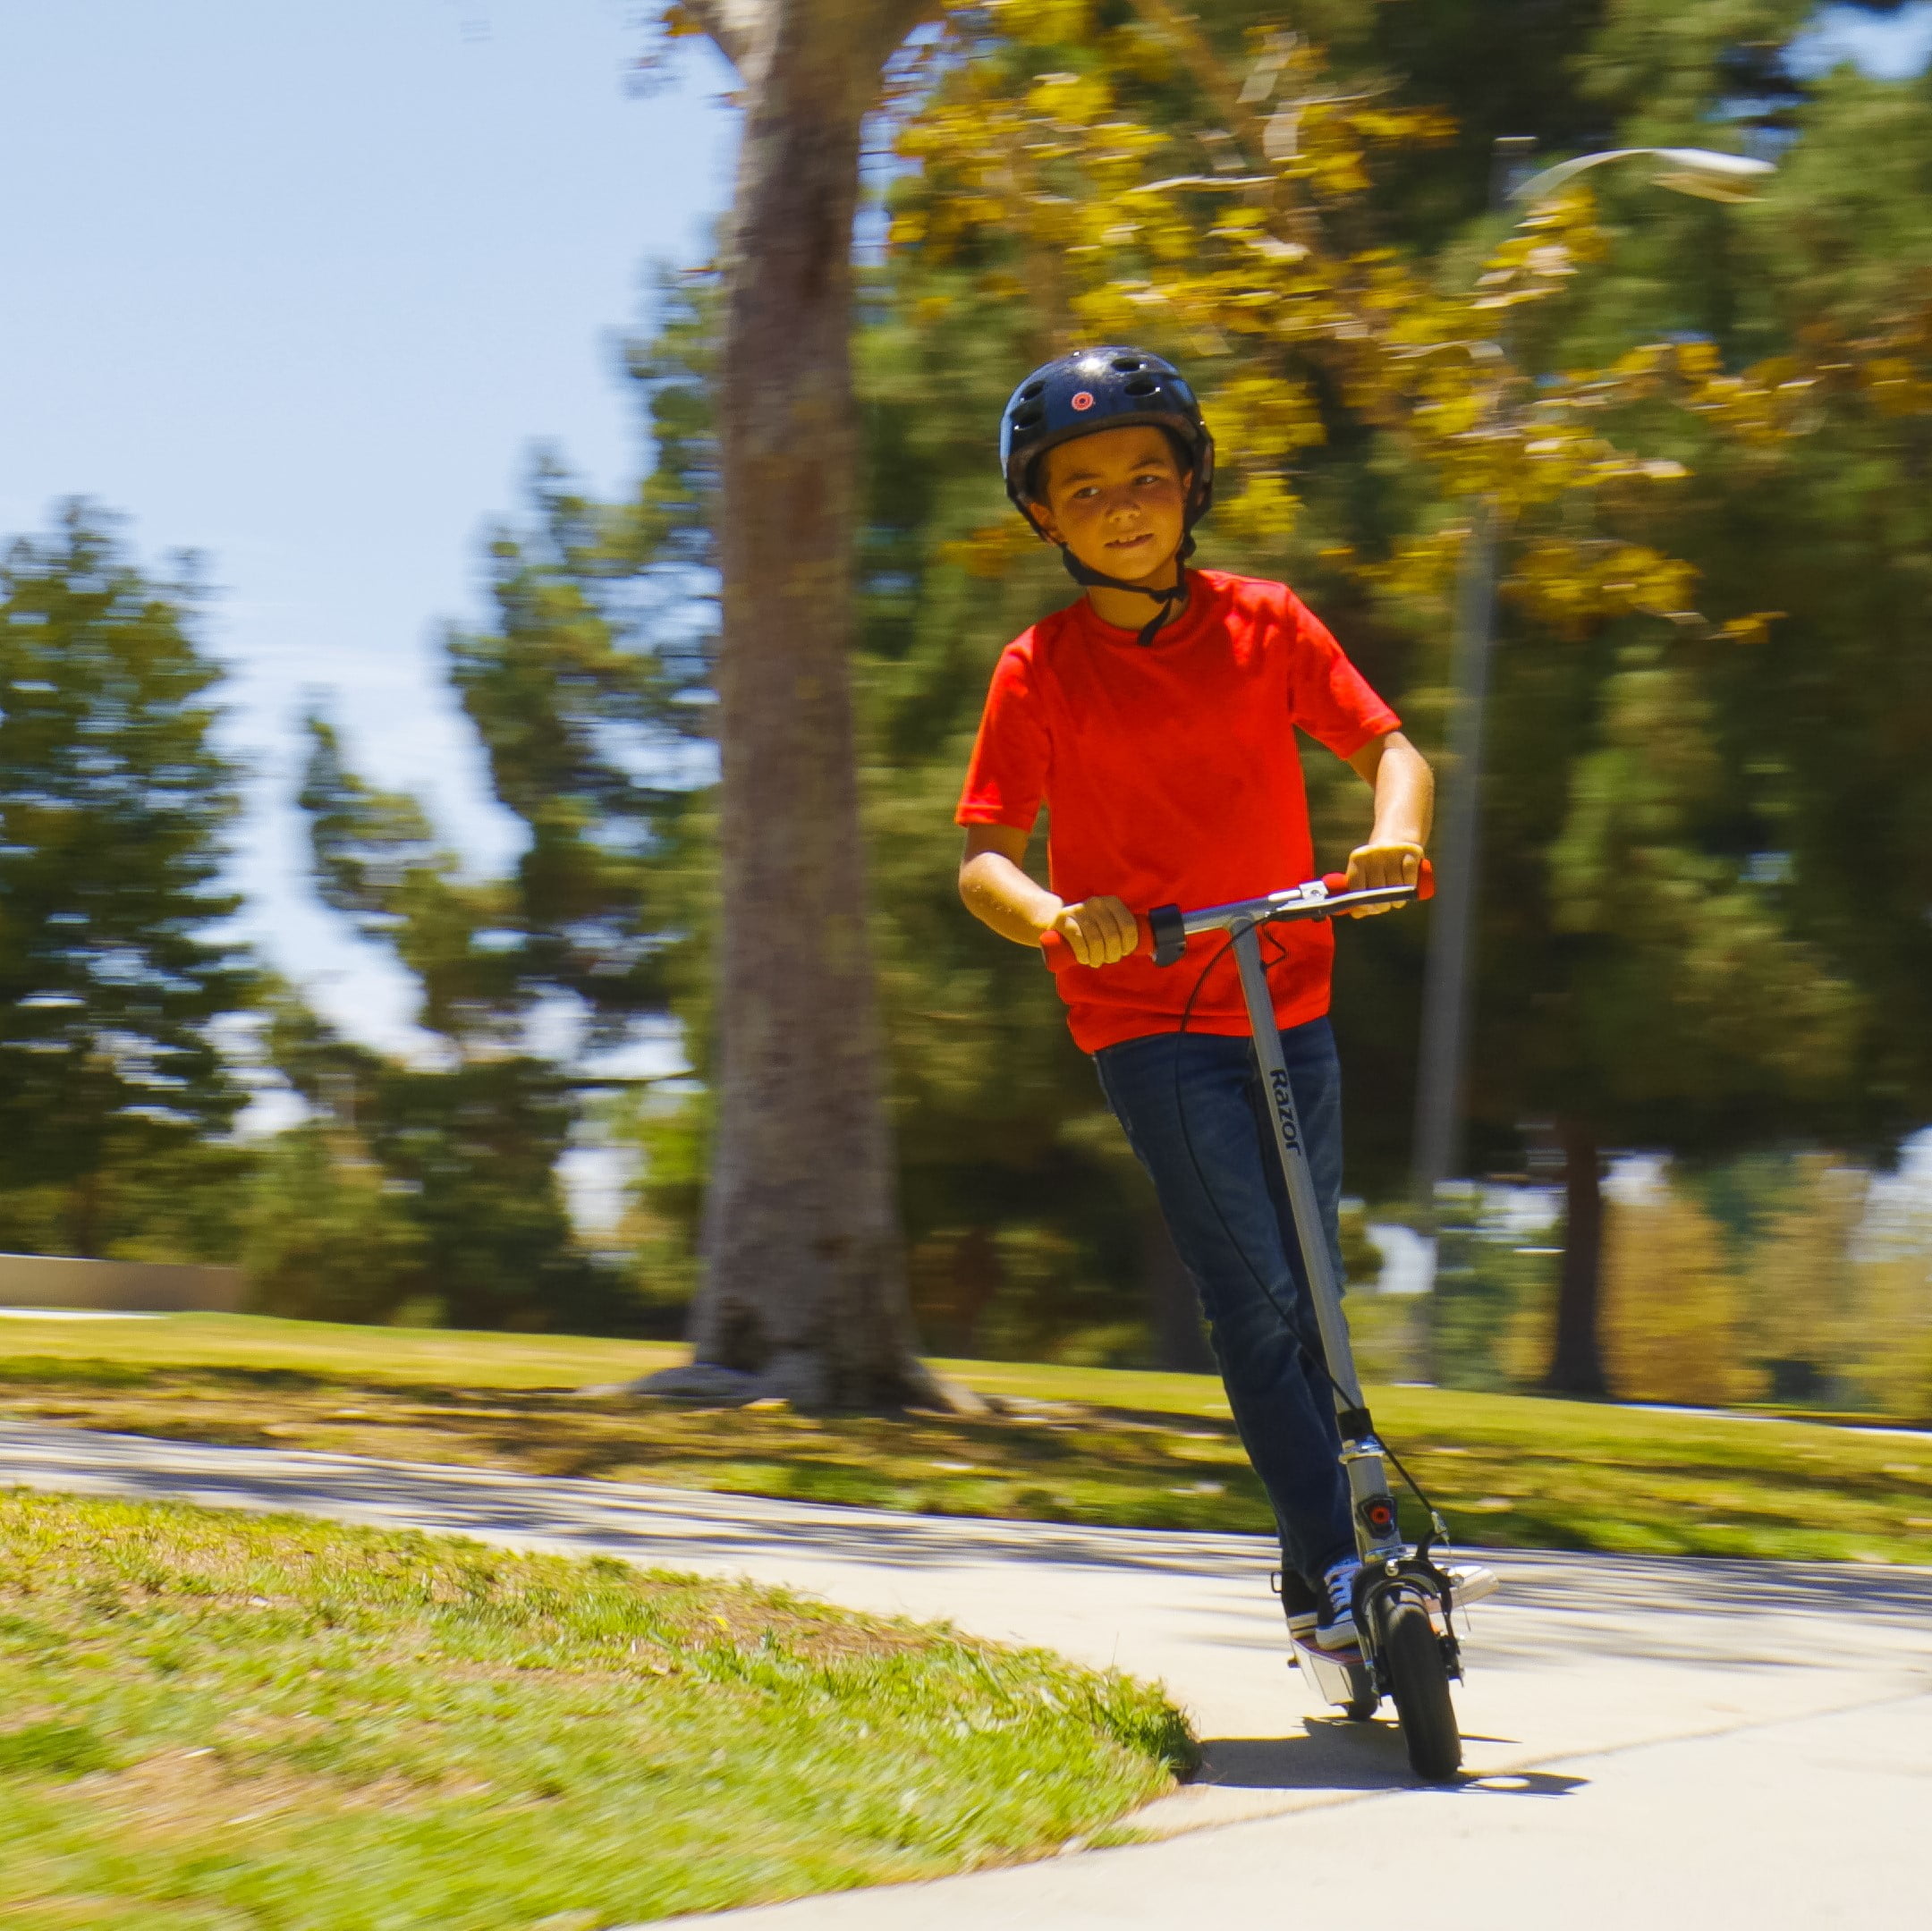 Razor Black Label E100 Electric Scooter - Blue, for Kids Ages 8+ and up 120 8" Pneumatic Front Tire, Up to mph & up to 35 mins of Ride